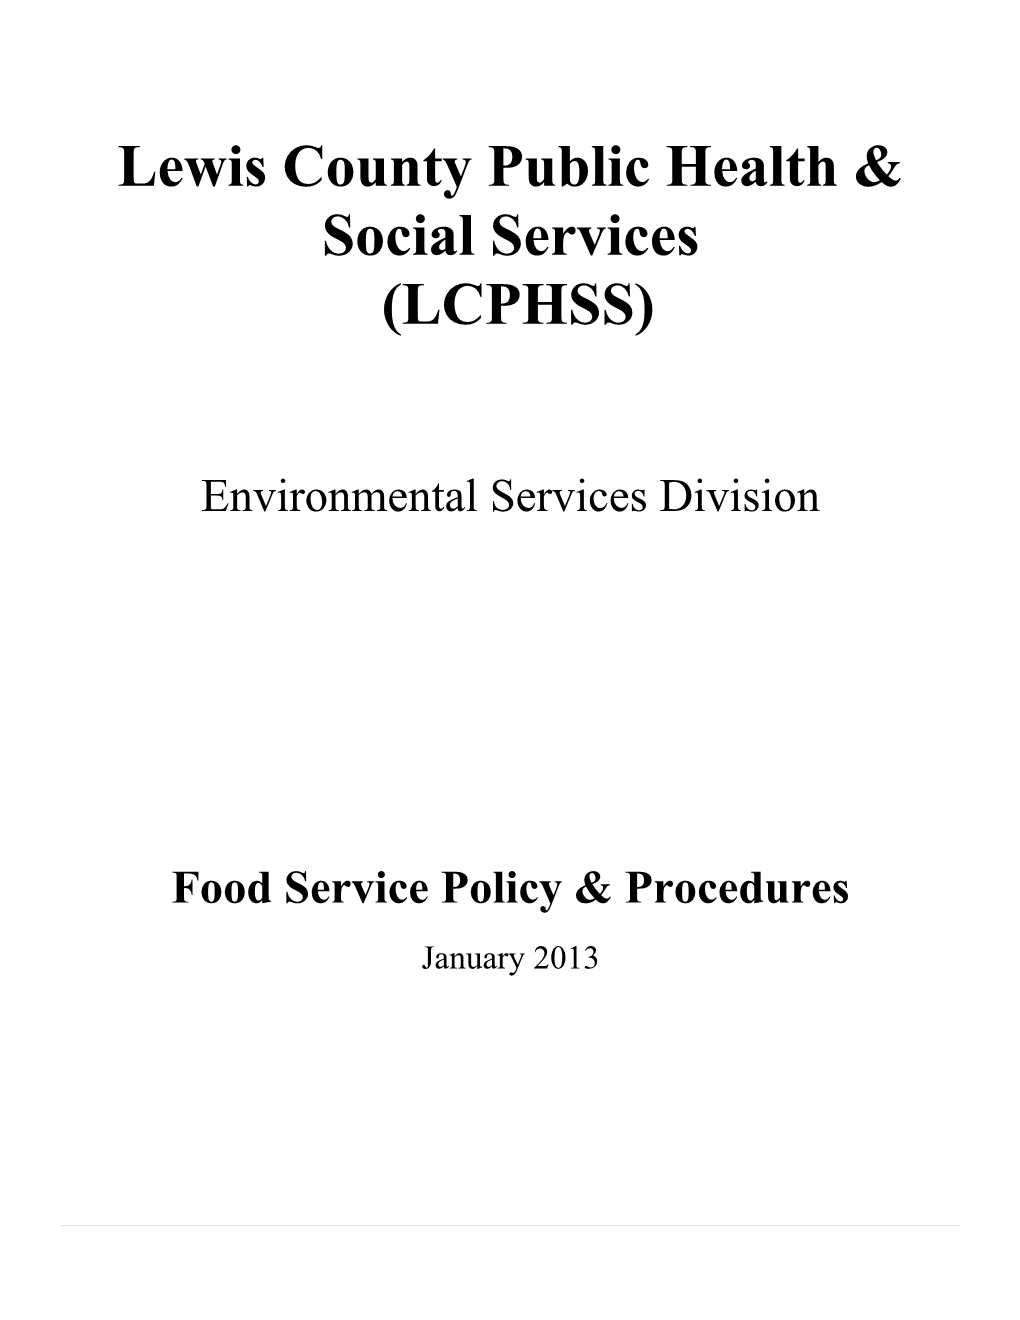 LCPHSS Food Service Policy & Procedure